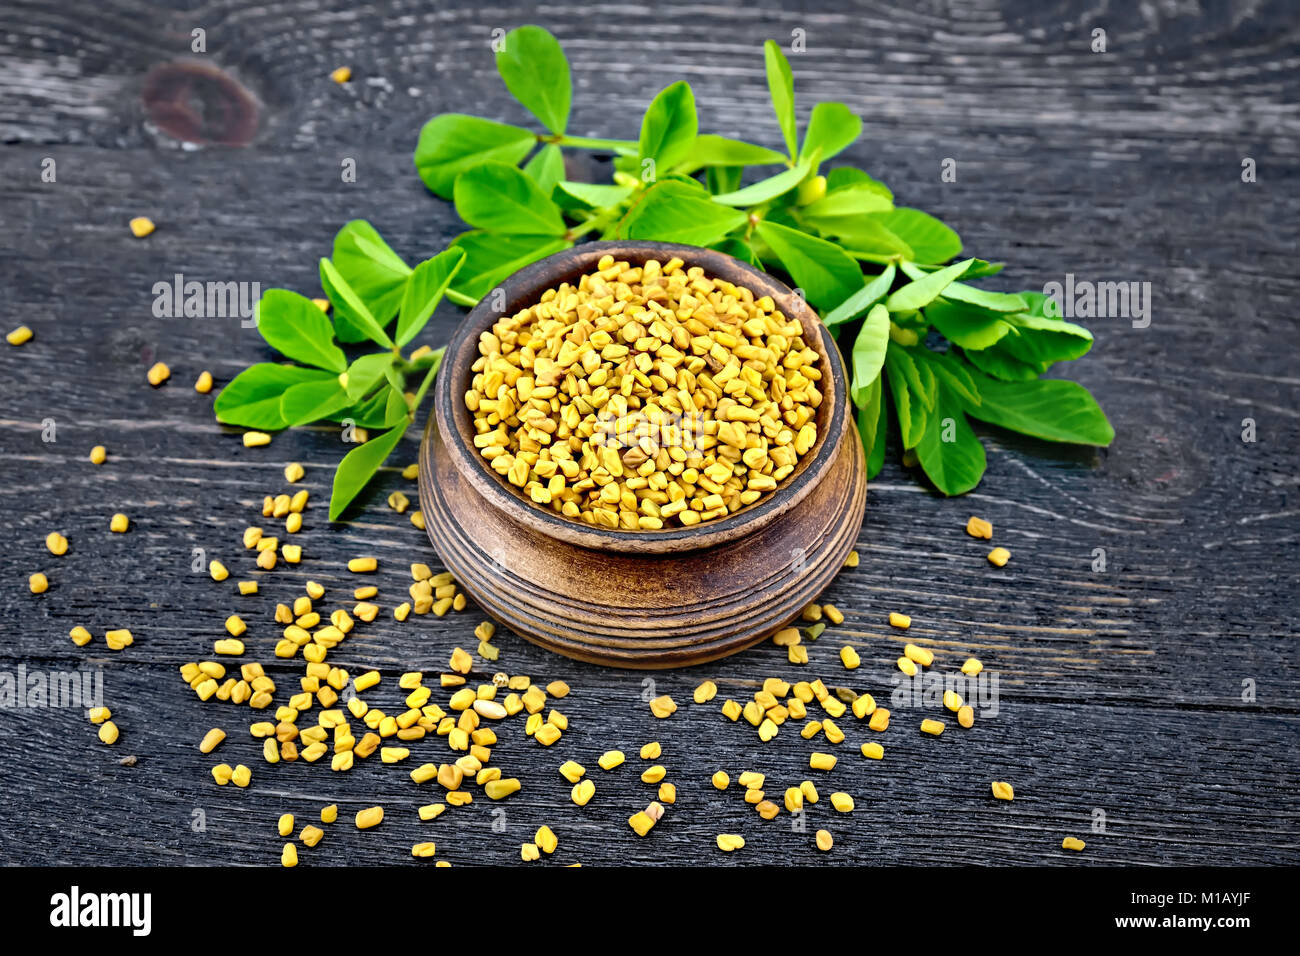 Fenugreek seeds in a bowl and on a table with green leaves against a black wooden board Stock Photo